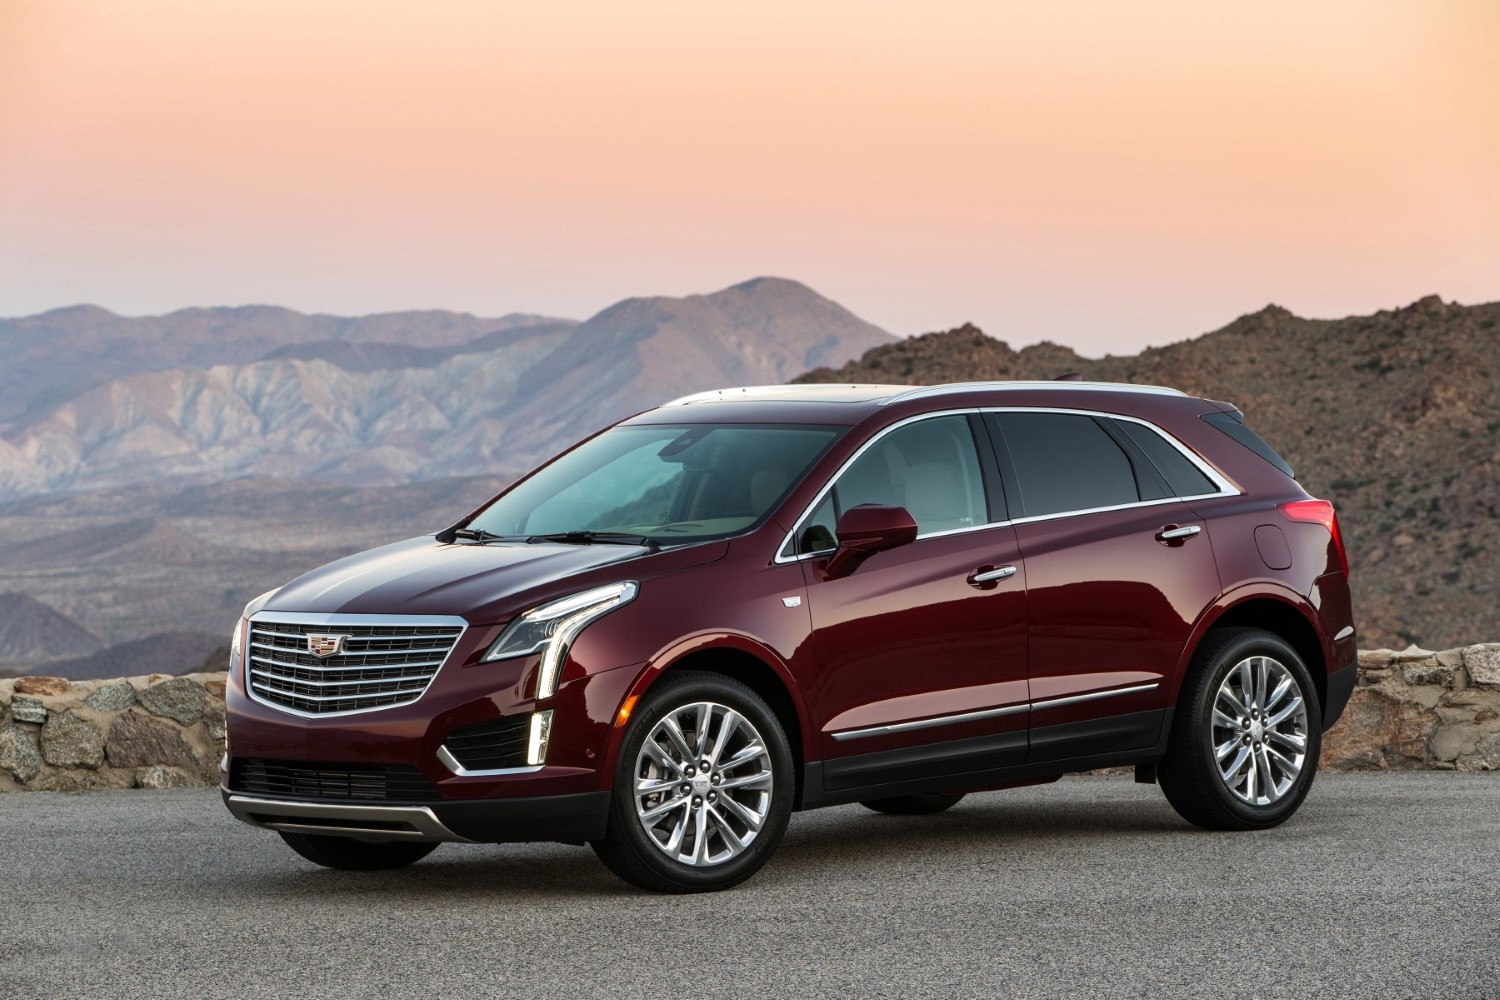 2019 Cadillac XT5 SUV Specs, Review, and Pricing | CarSession